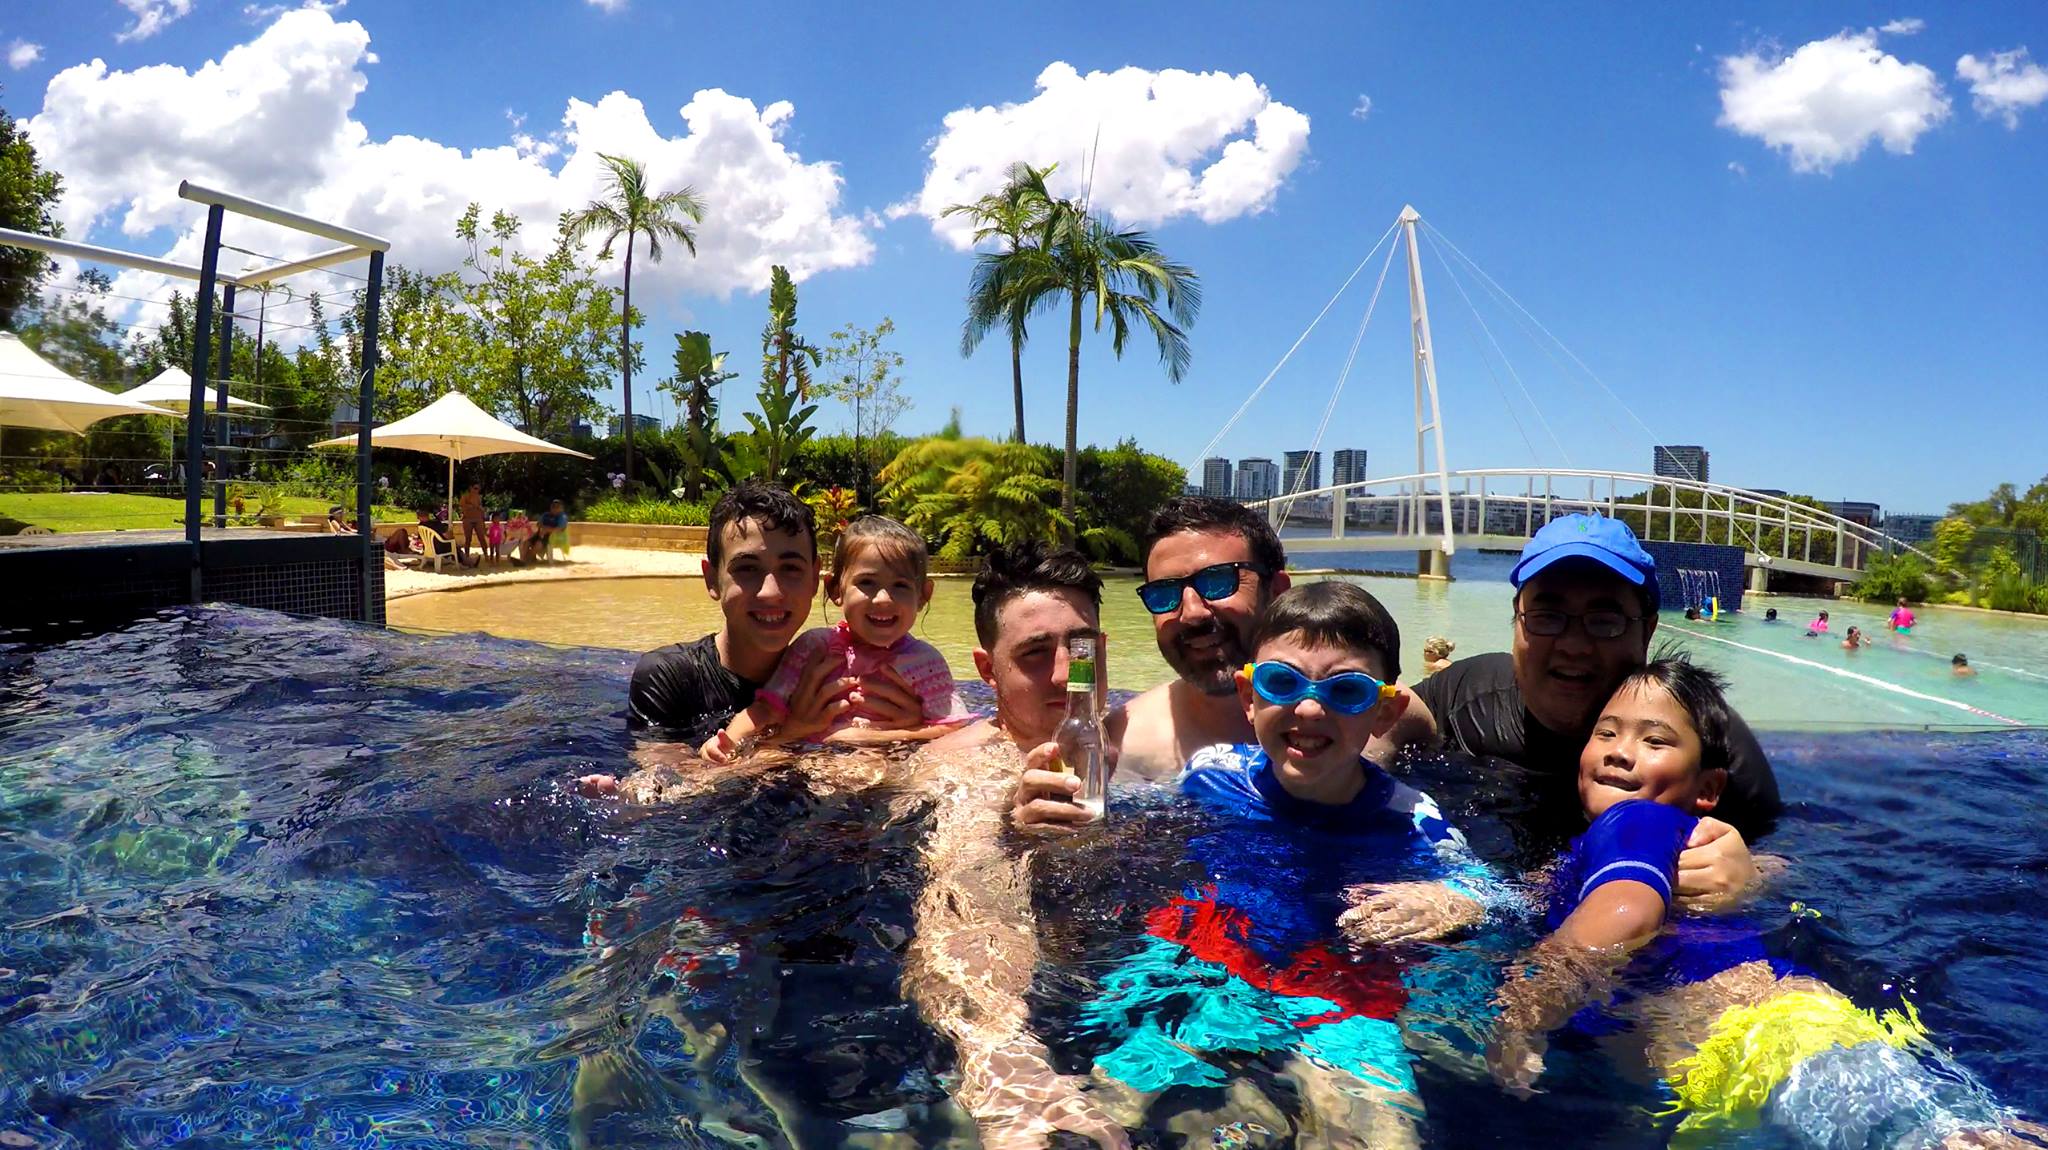 Happy Boxing Day Test lunch break! Lunch and a swim with the Cu's